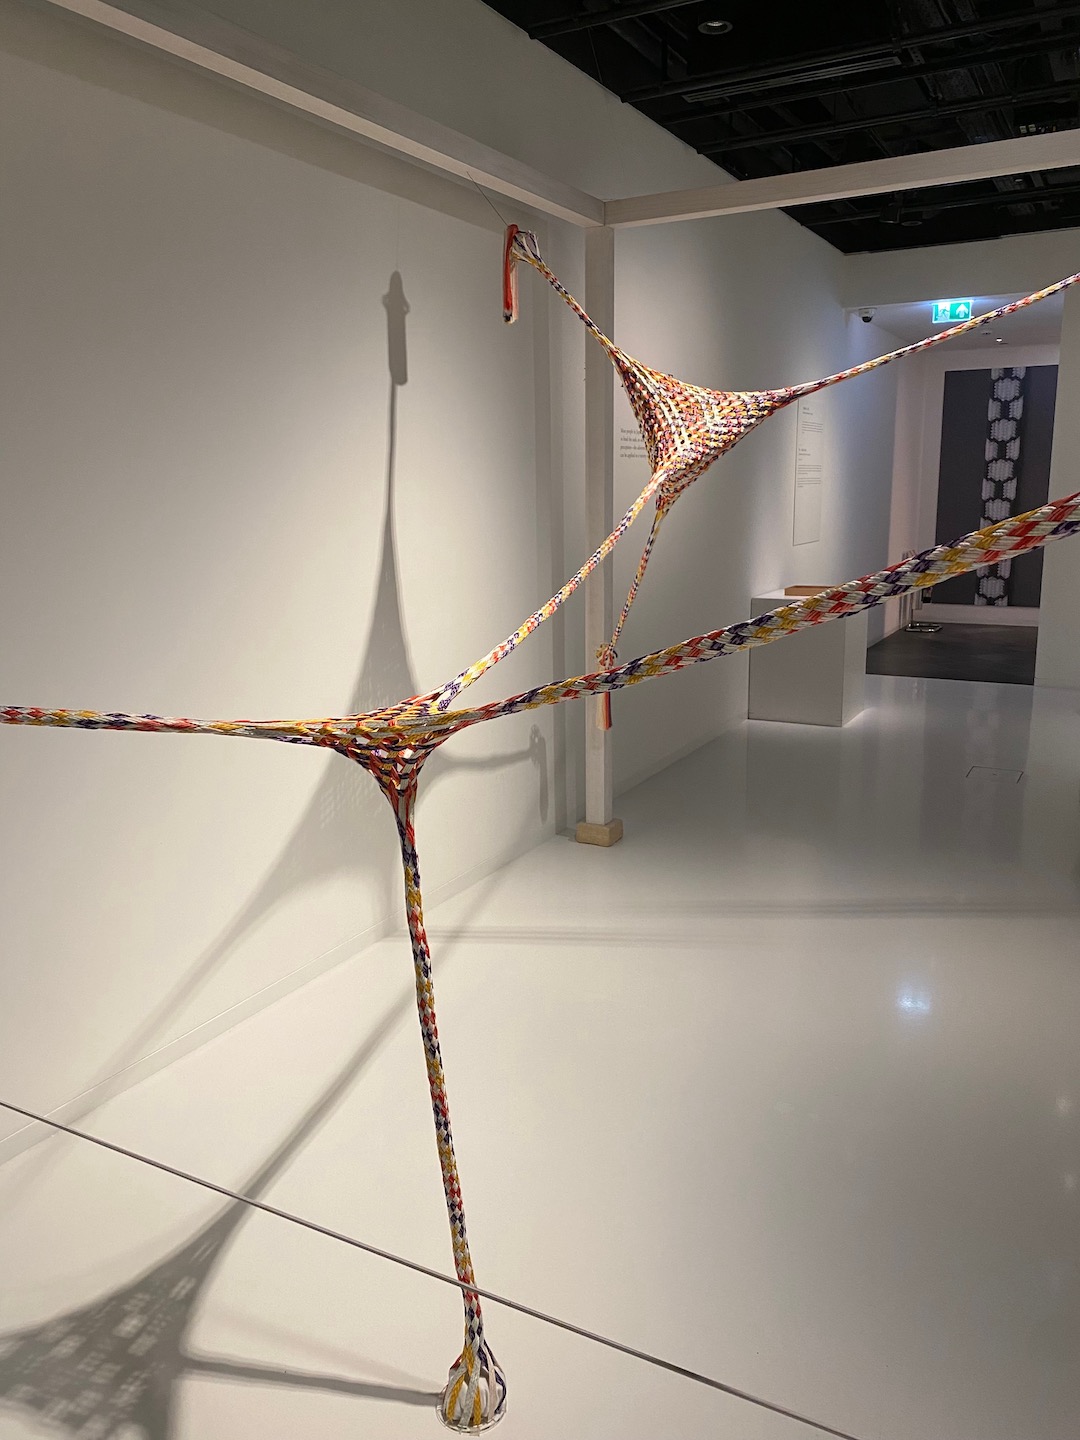 A complex sculpture made of braided cord